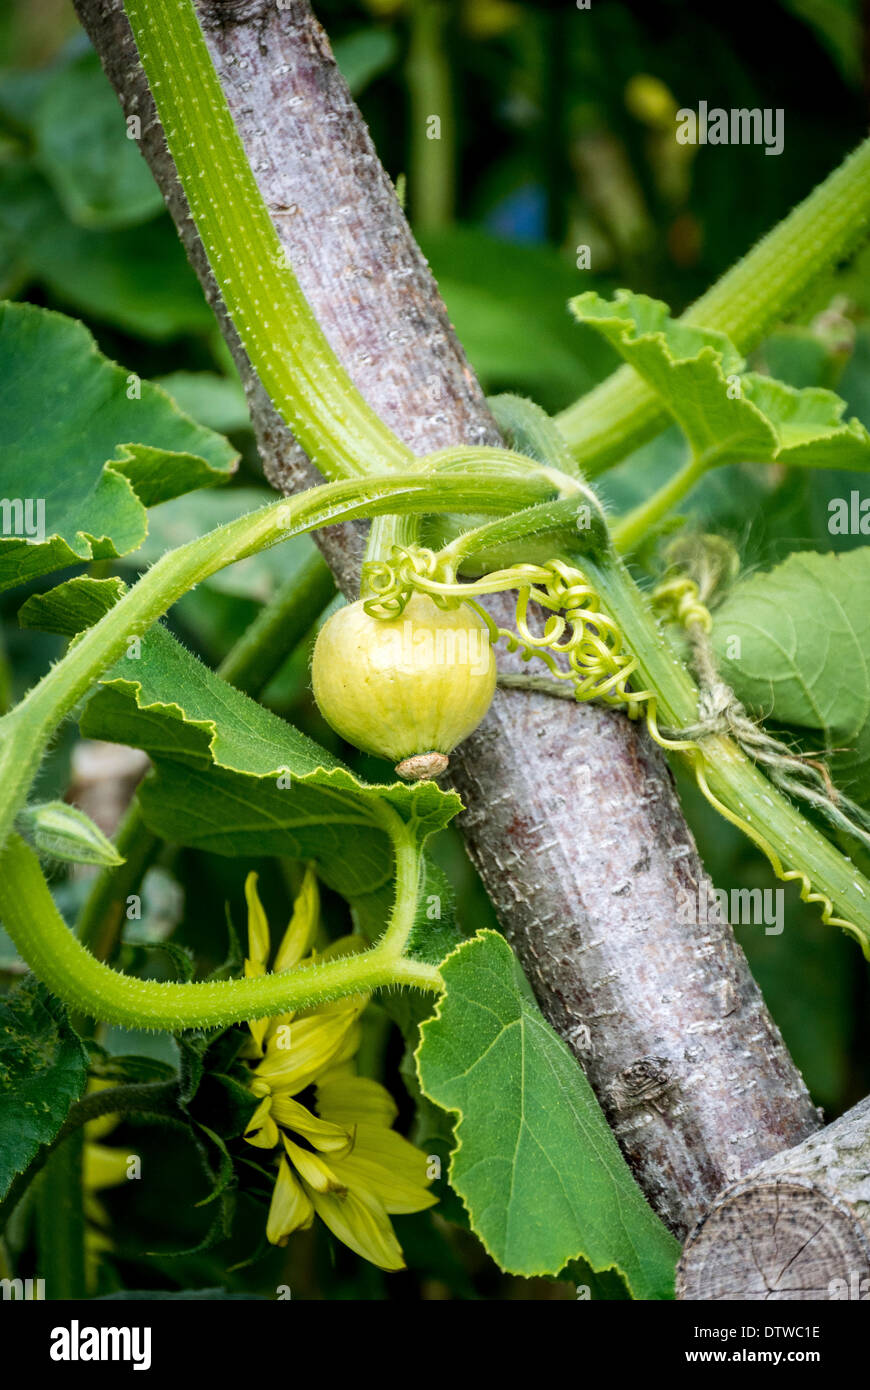 Young squash plant growing up support made from bracnhes Stock Photo